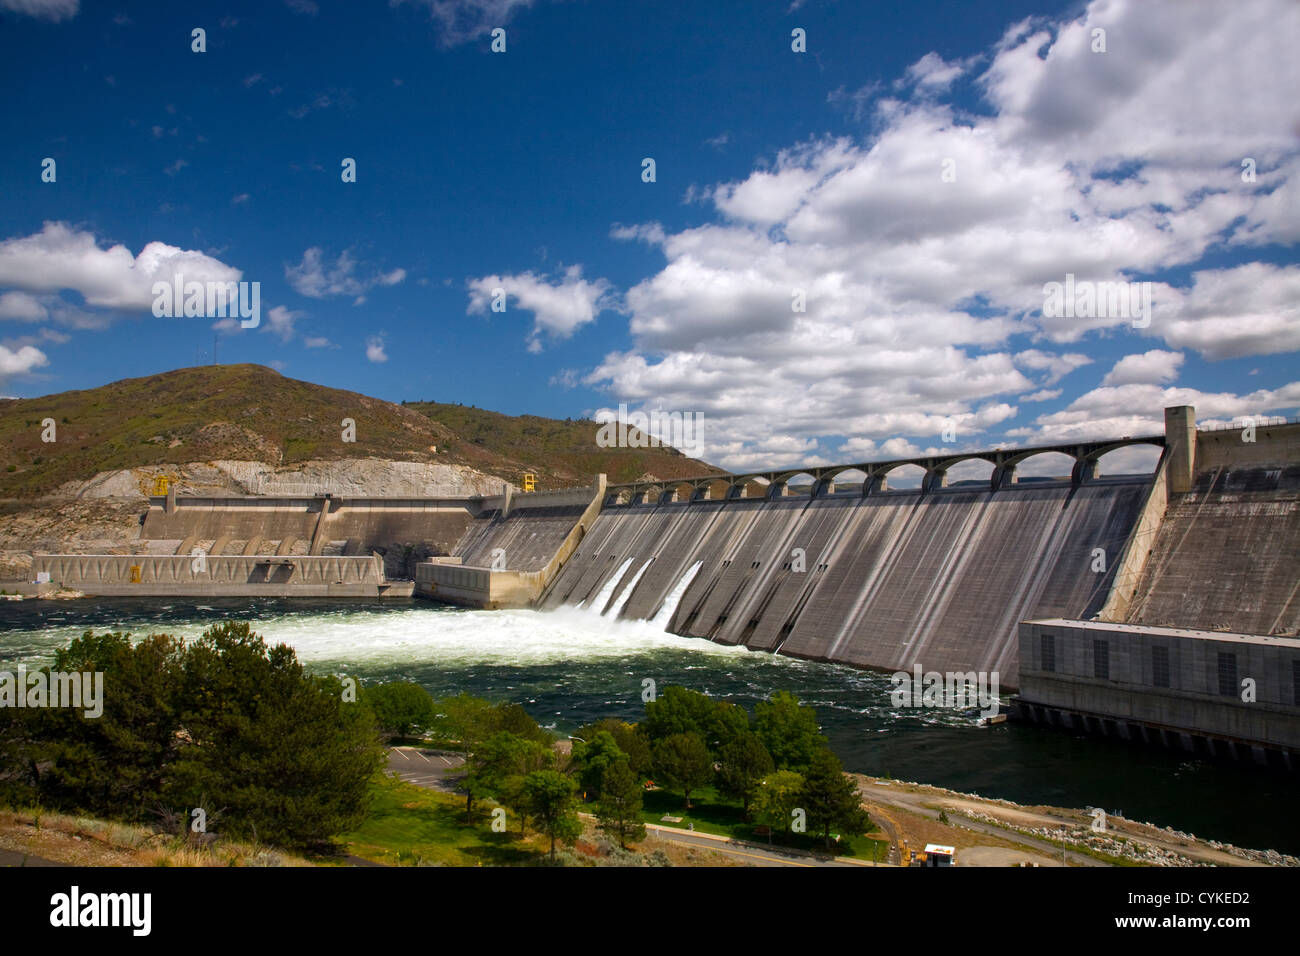 WA05609-00...WASHINGTON - Grand Coulee Dam and three power houses on the Columbia River. Stock Photo